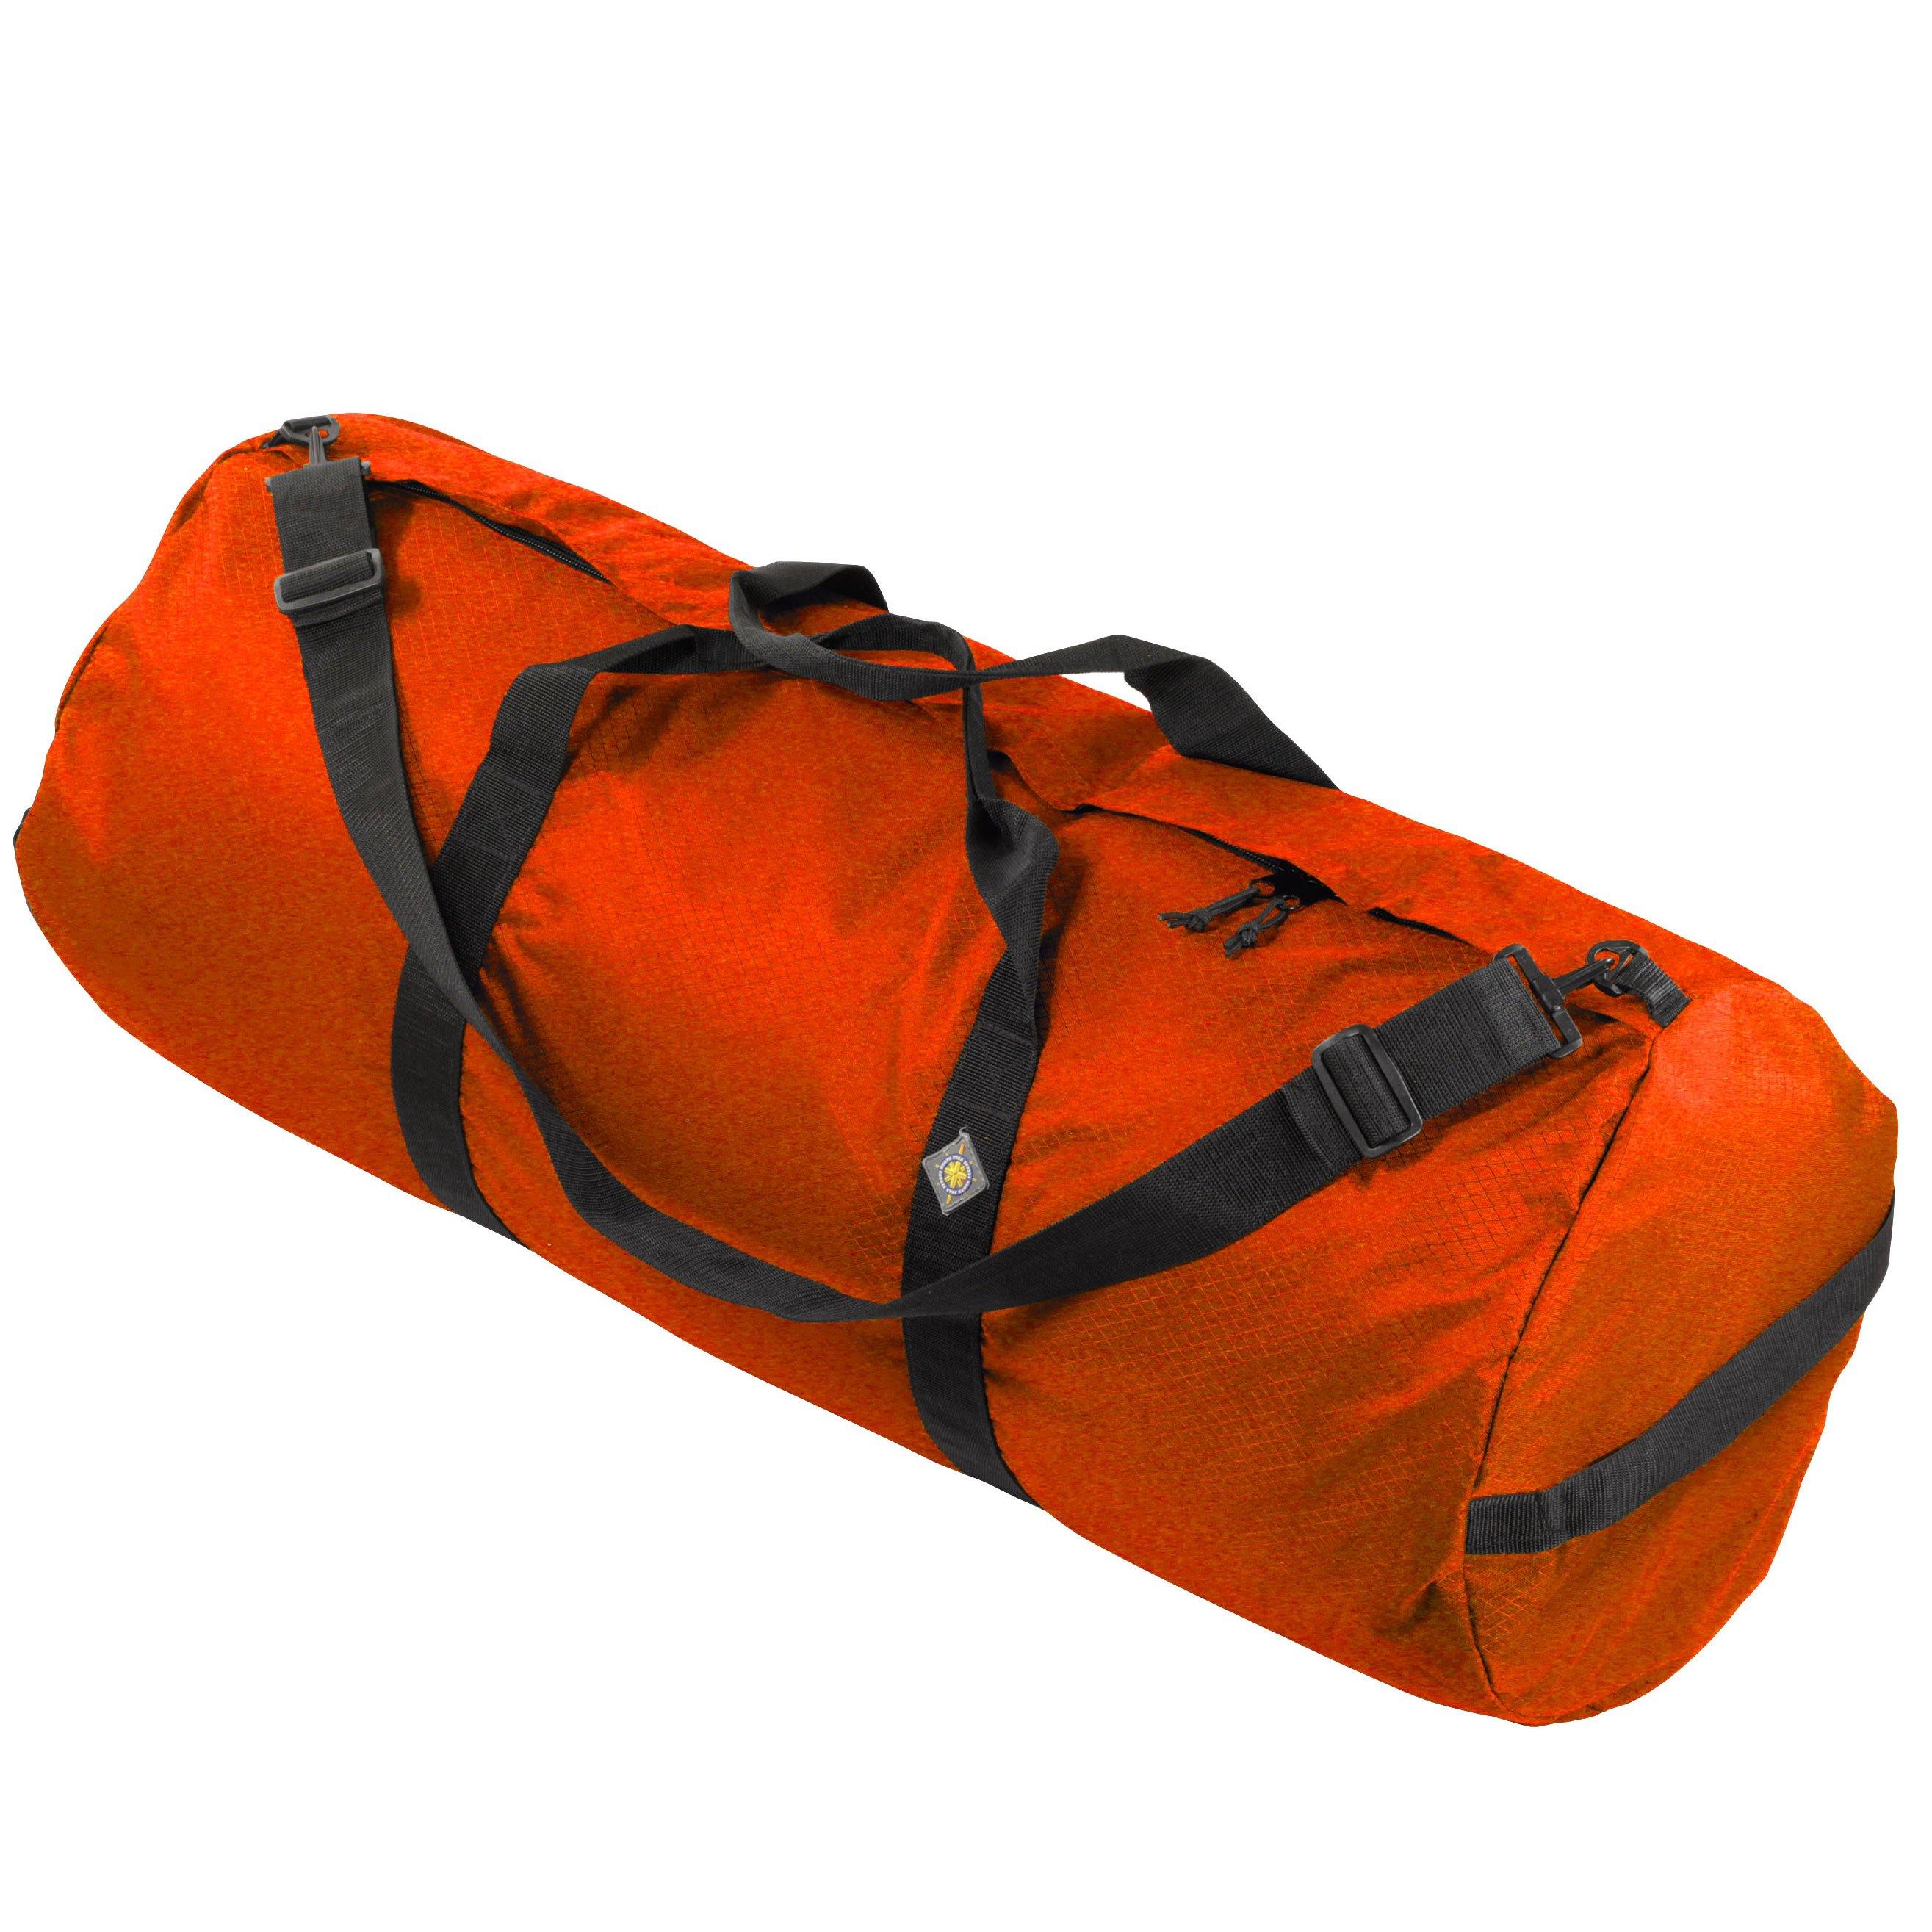 Studio photo the International Orange SD1640DLX Standard Duffle by Northstar Bags. 131 liter duffel with diamond ripstop fabric, thick webbing straps, and a large format metal zipper. Guaranteed for life.